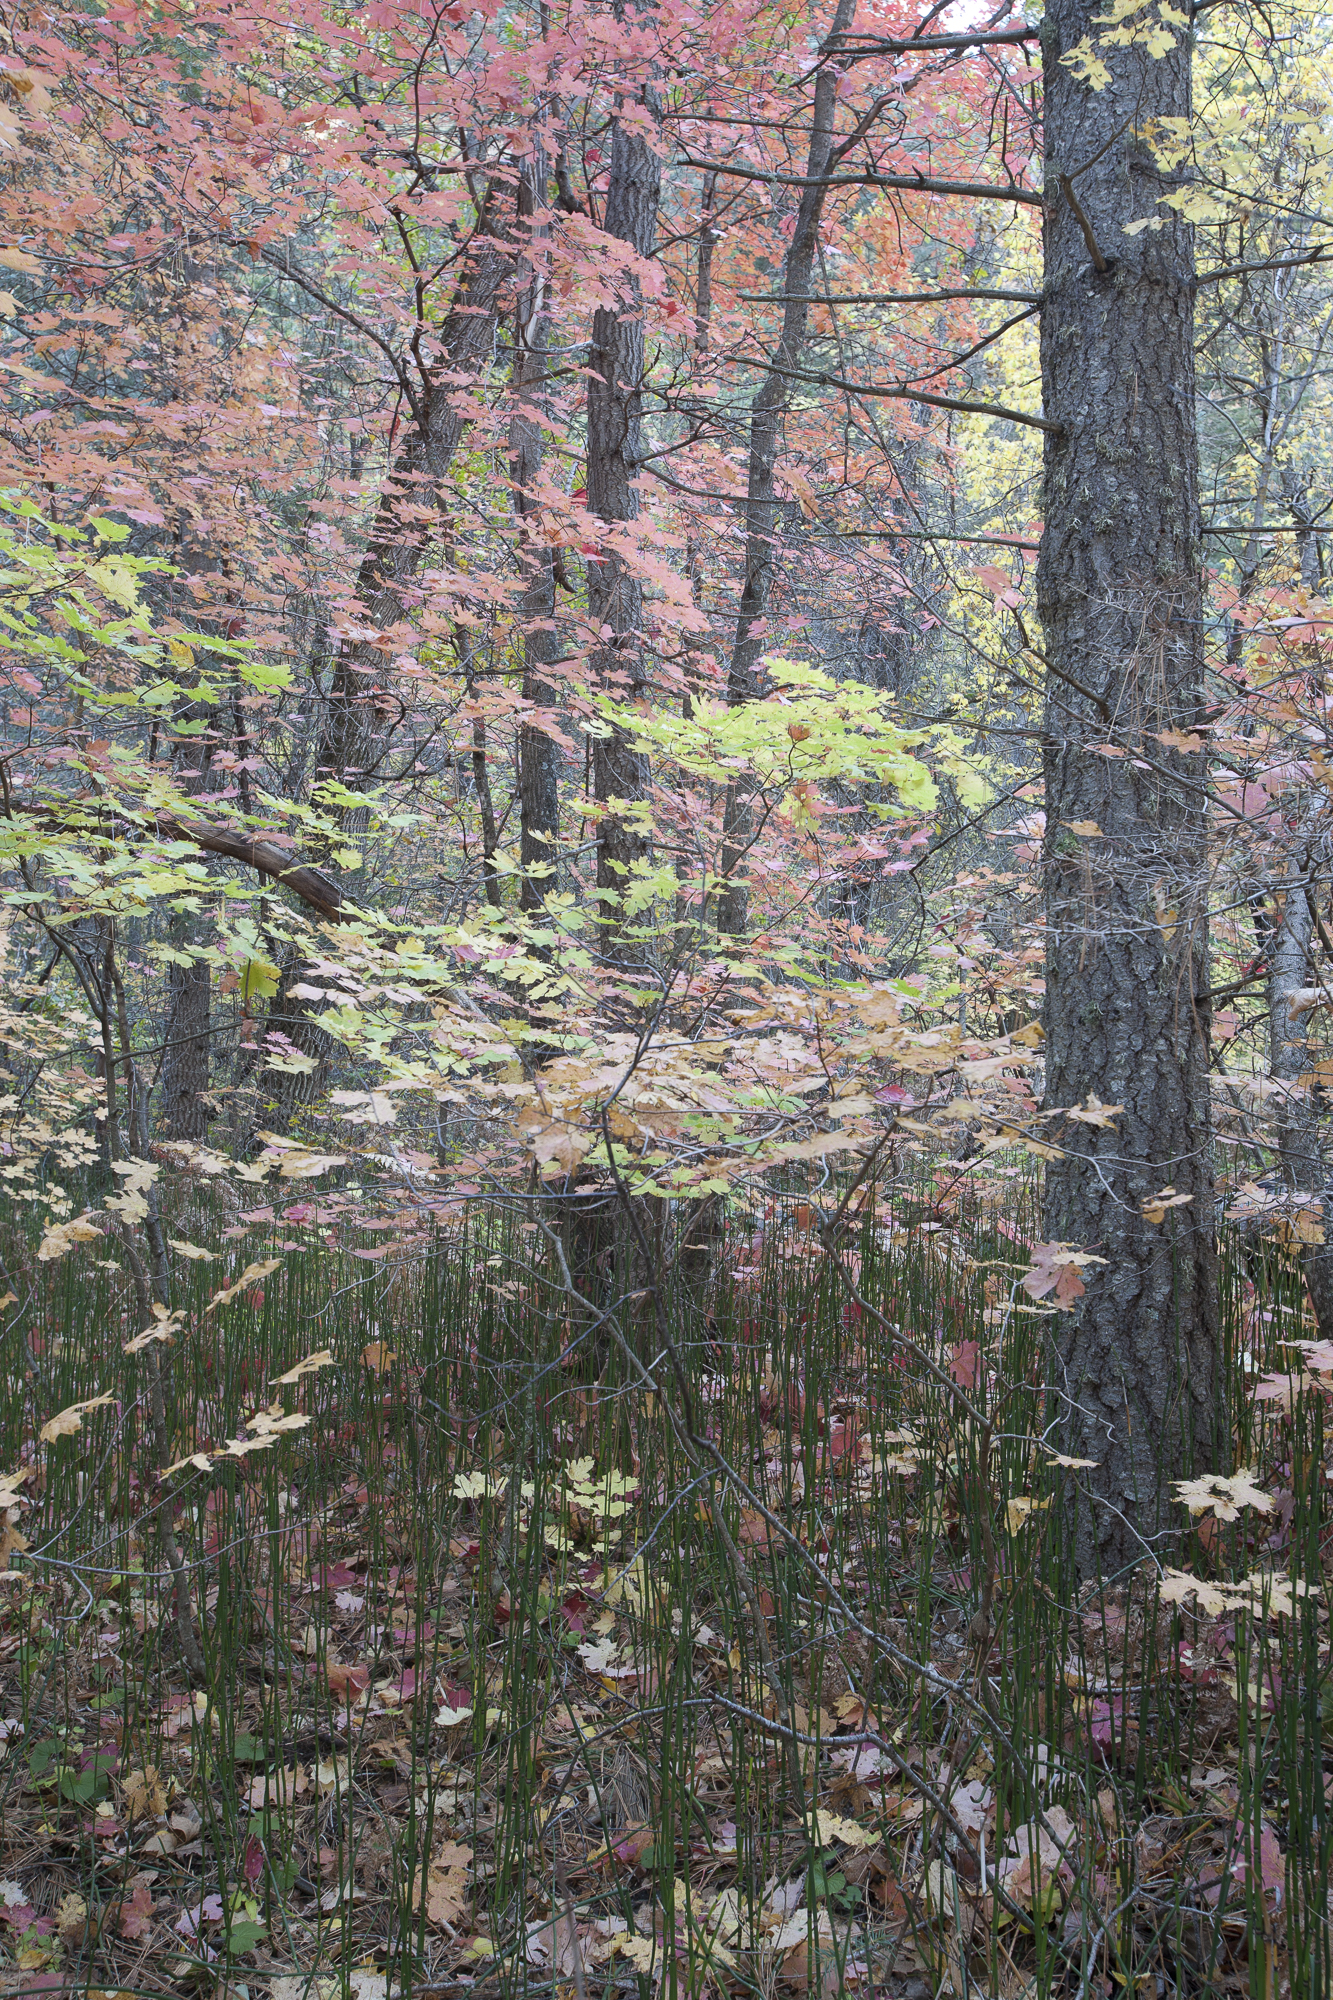 Horsetails & Maples in West Fork, RAW image